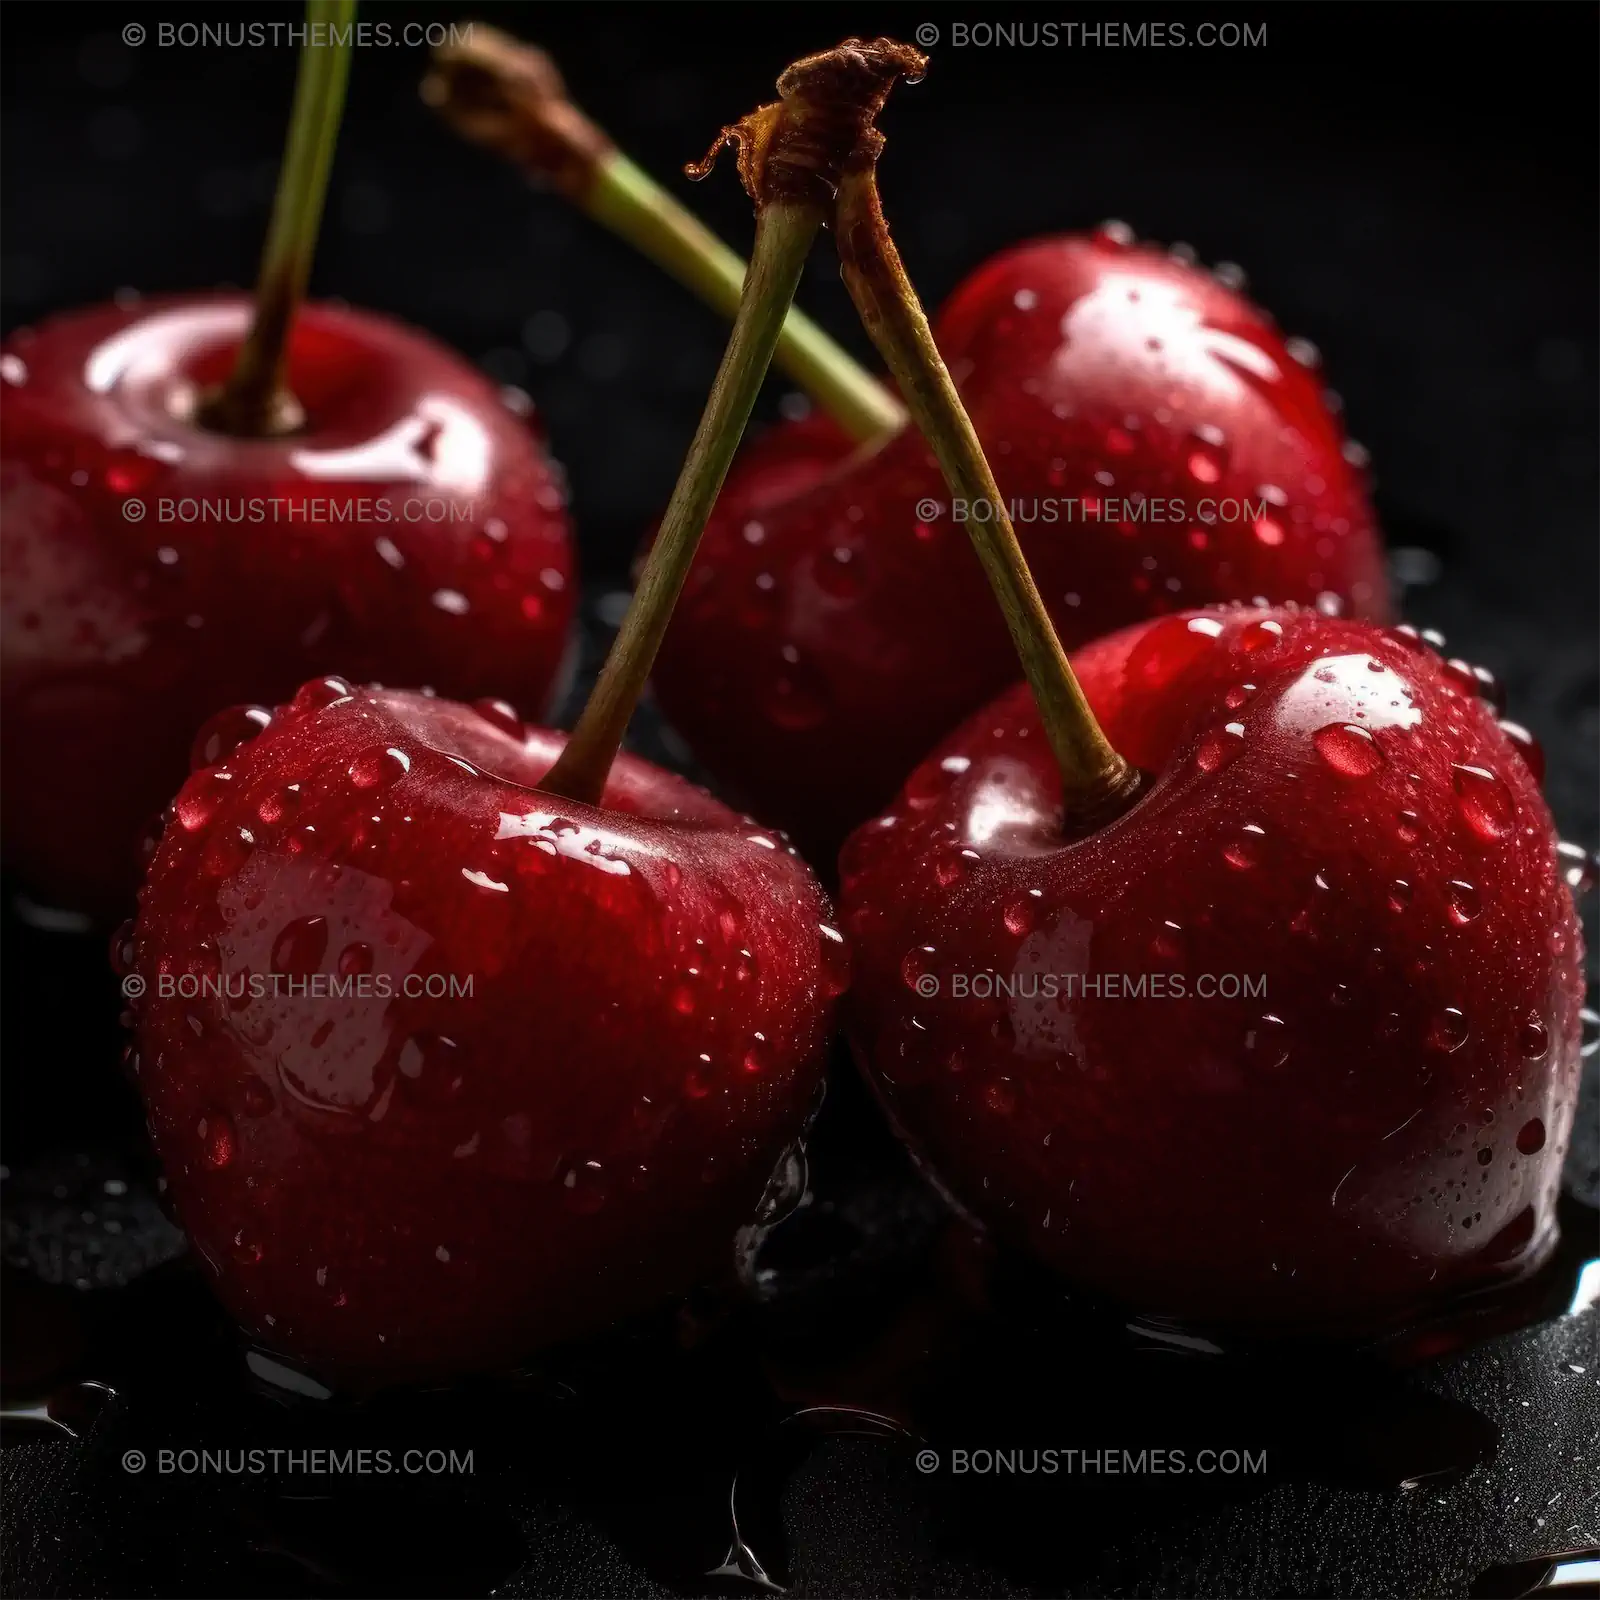 Cherries with water drops on a dark background